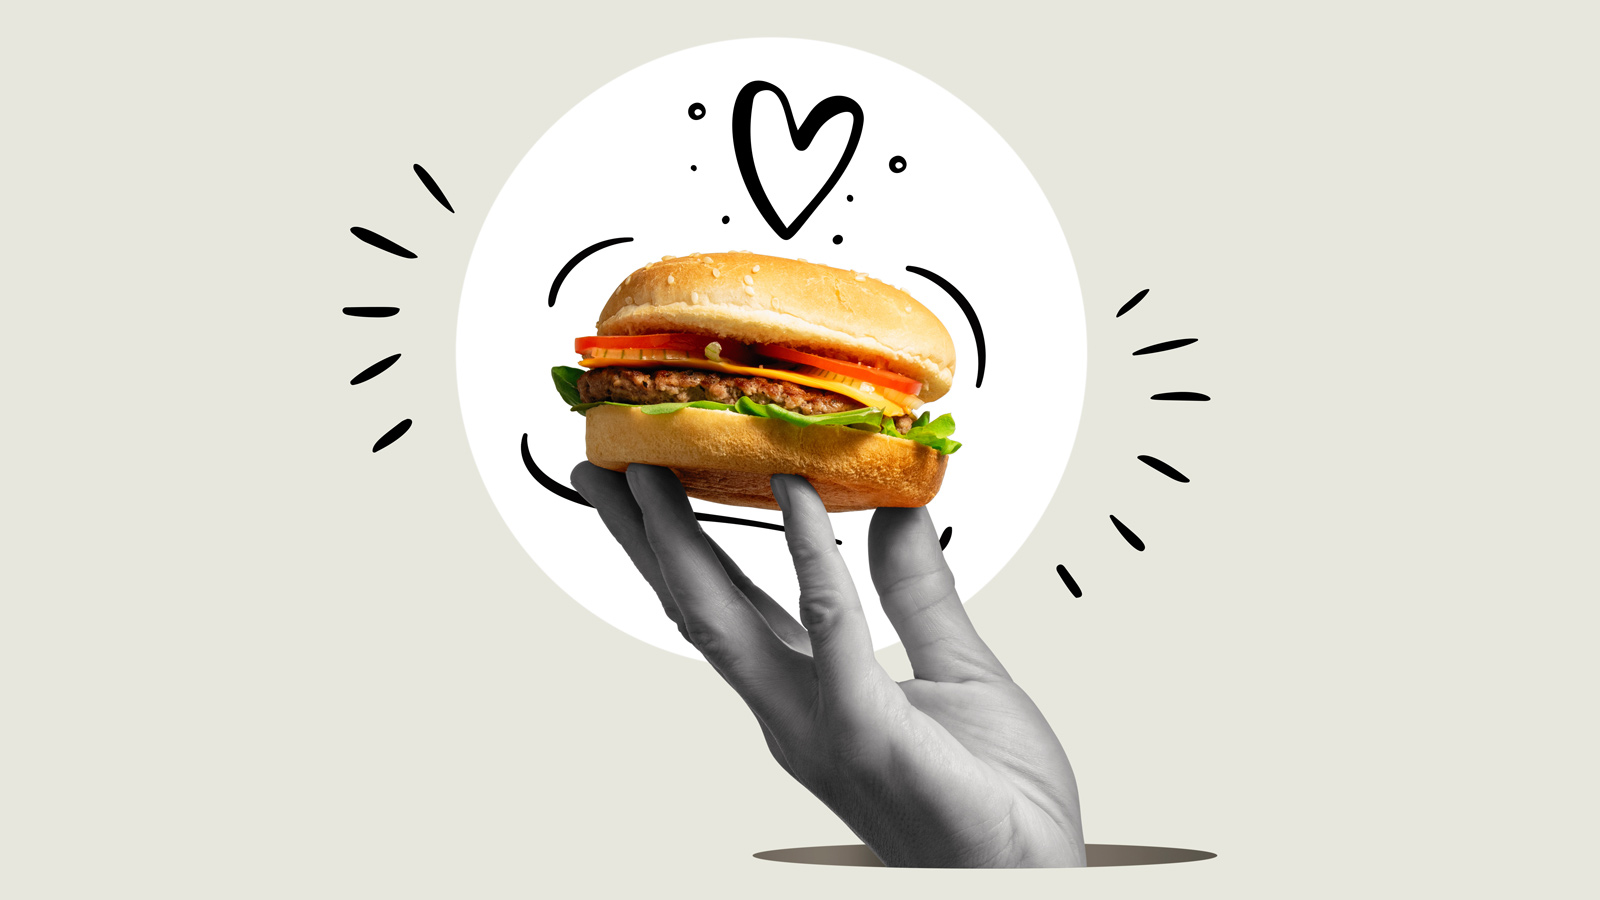 Emphasis markings and heart surround a hand holding a hamburger like a trophy.